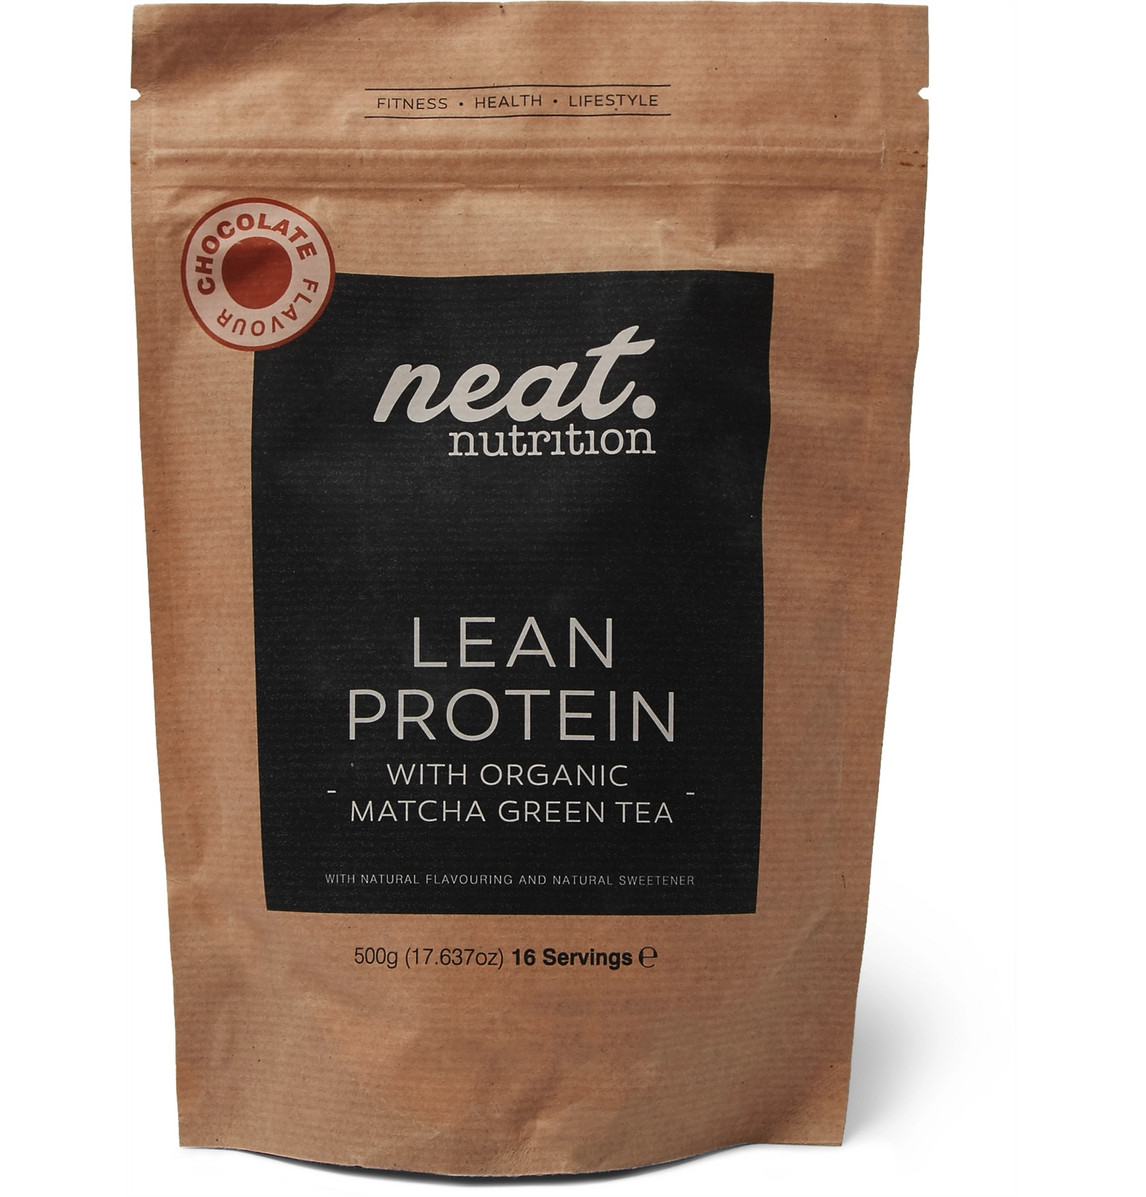 Neat Nutrition Lean Protein In Colorless